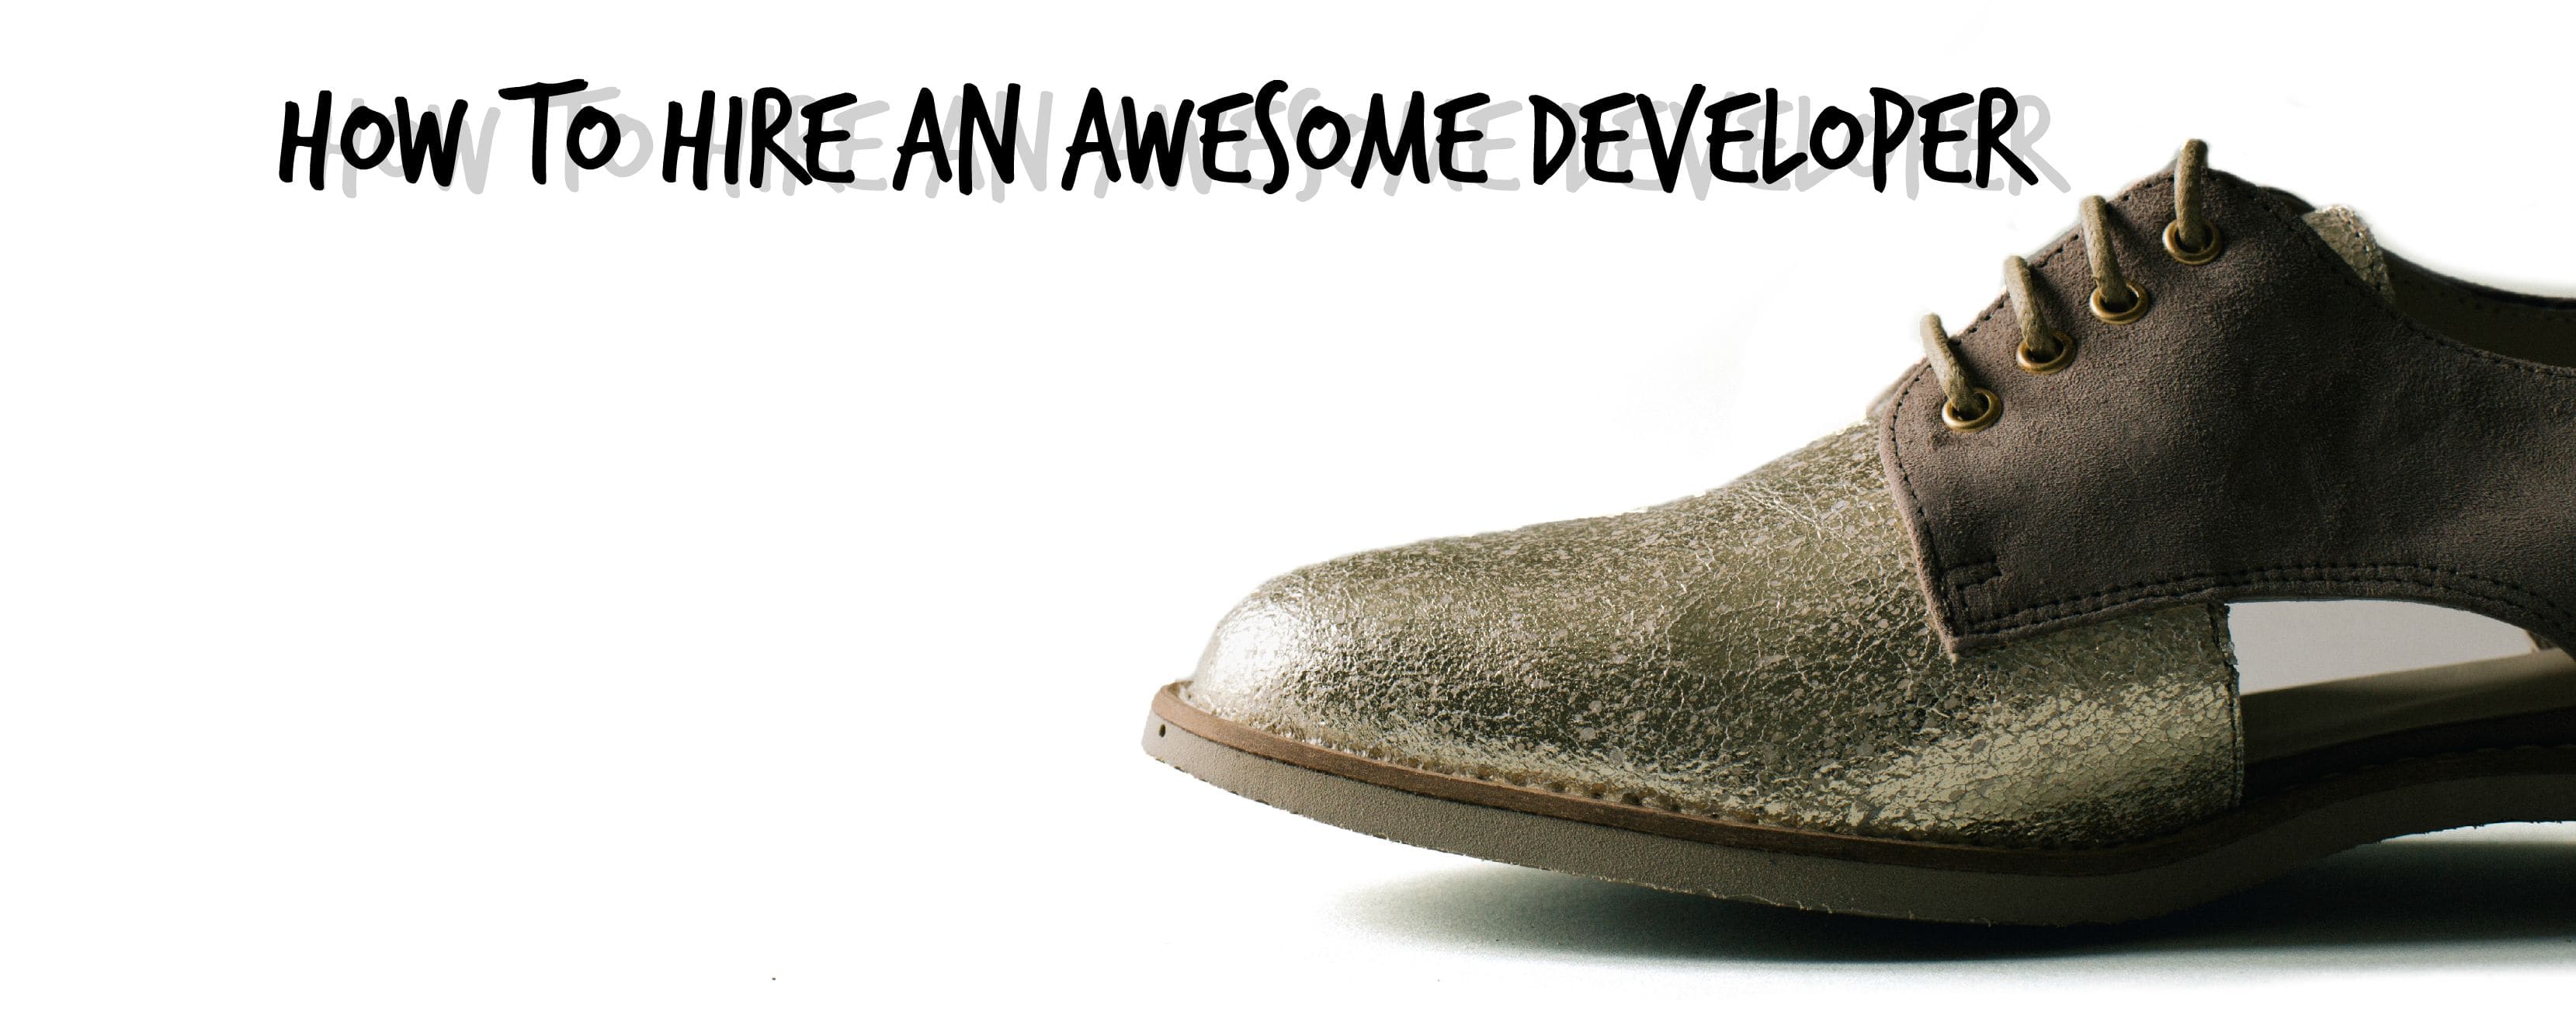 How To Hire An Awesome Developer